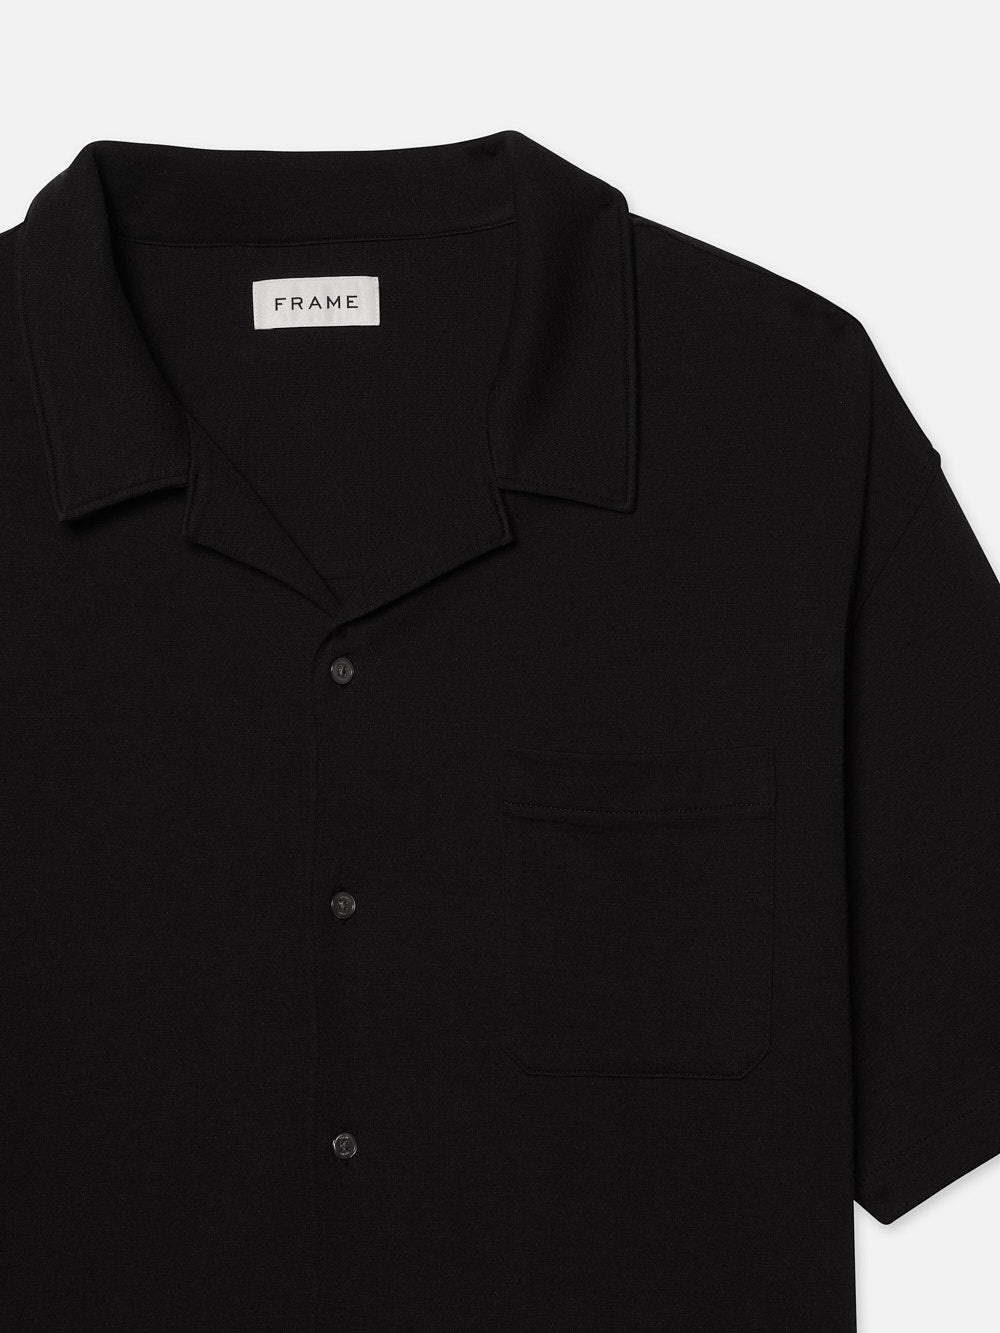 Duo Fold Relaxed Shirt in Black - 2